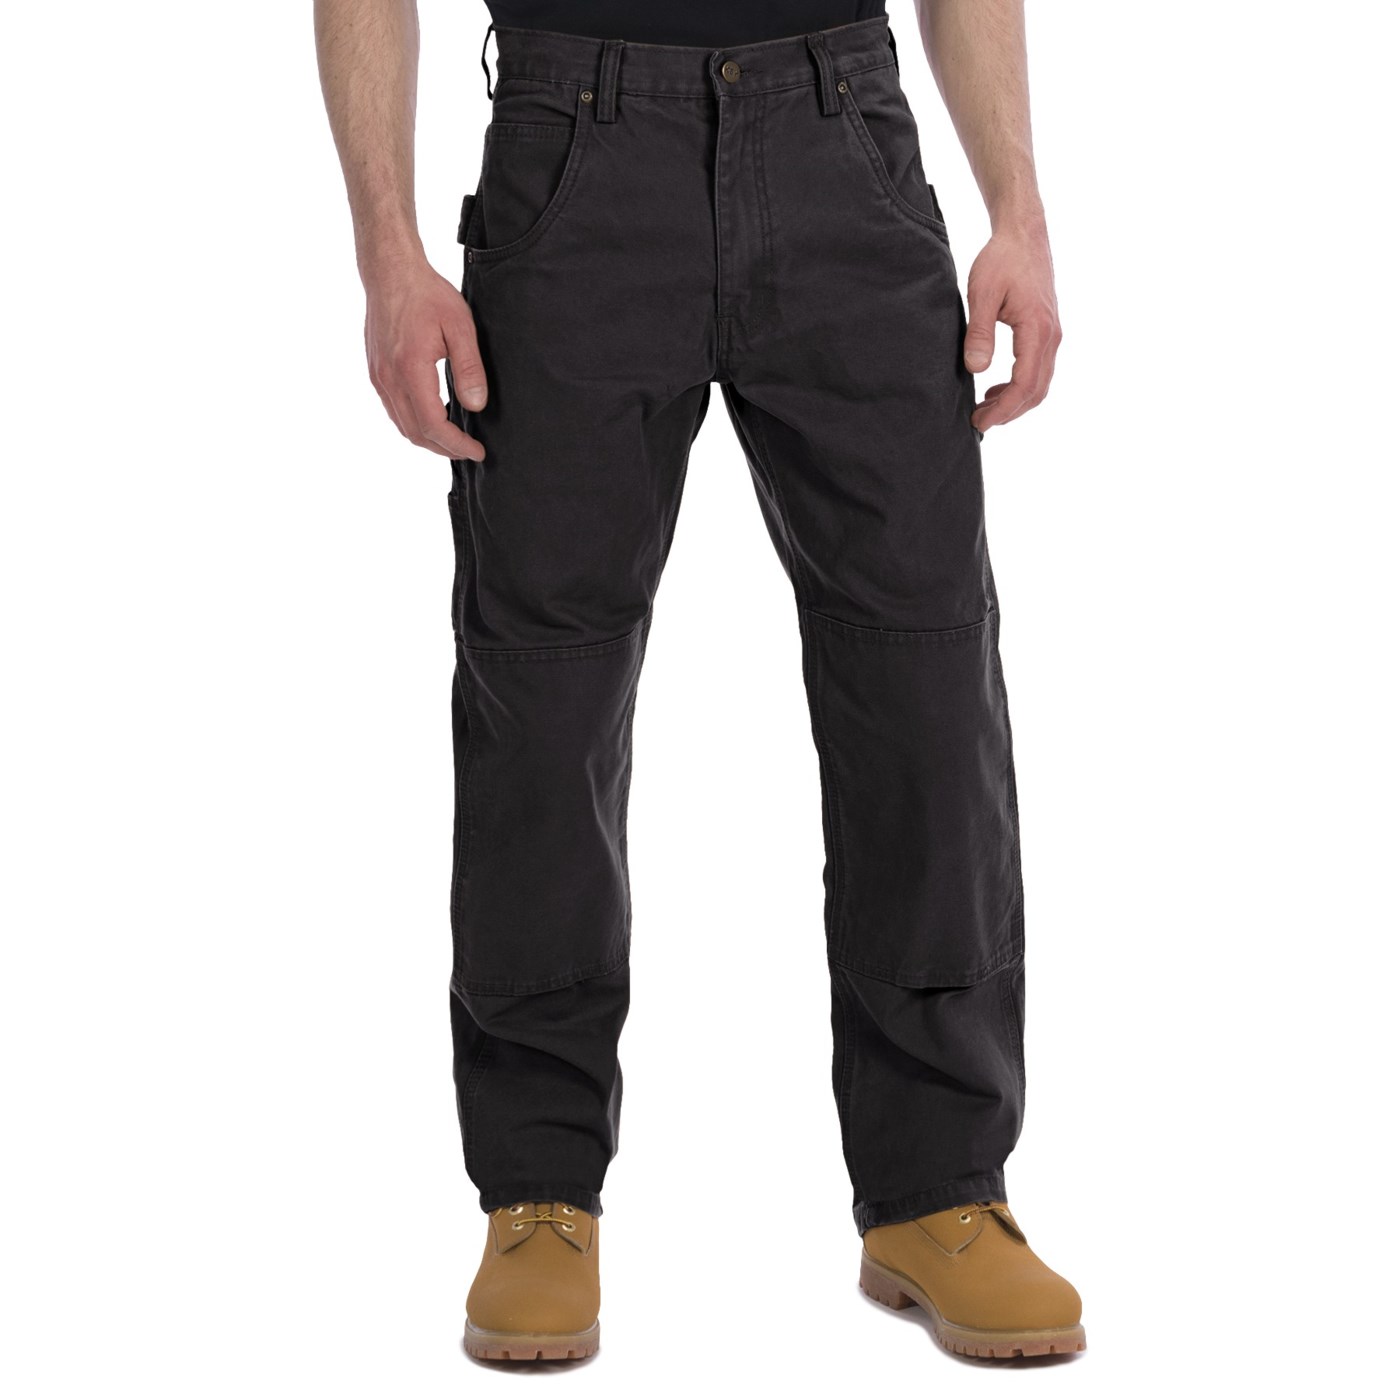 Lakin Mckey Canvas Duck Dungaree Work Pants (For Men) 5795A 46